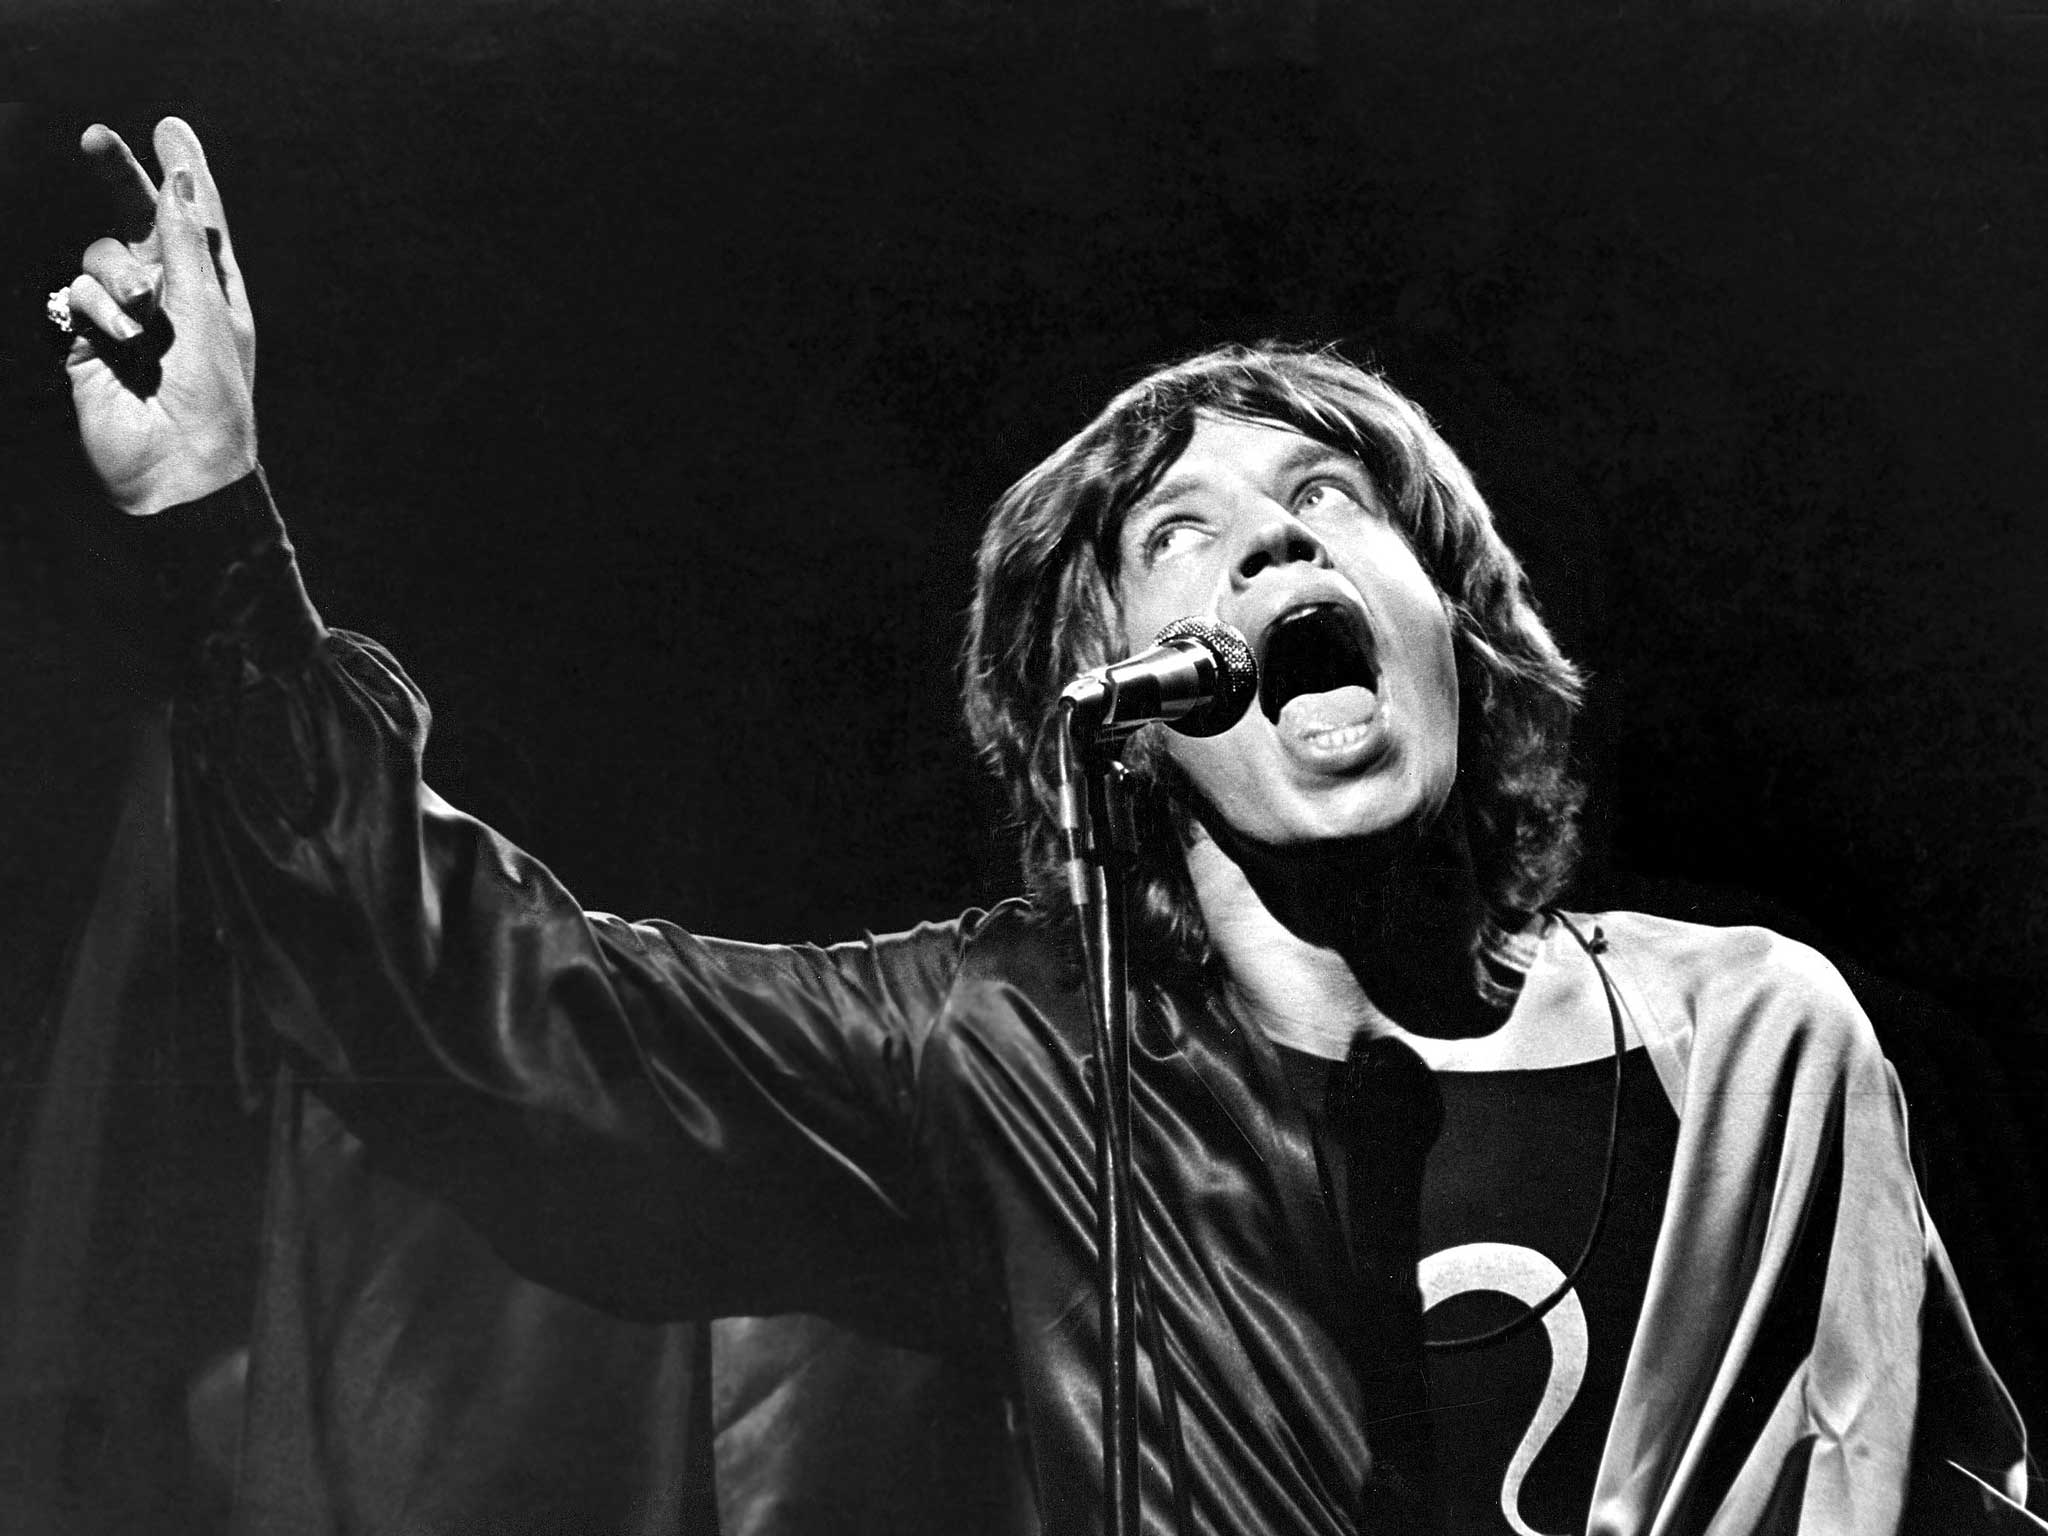 ‘What’s gone wrong?’ asked Mick Jagger after Altamont